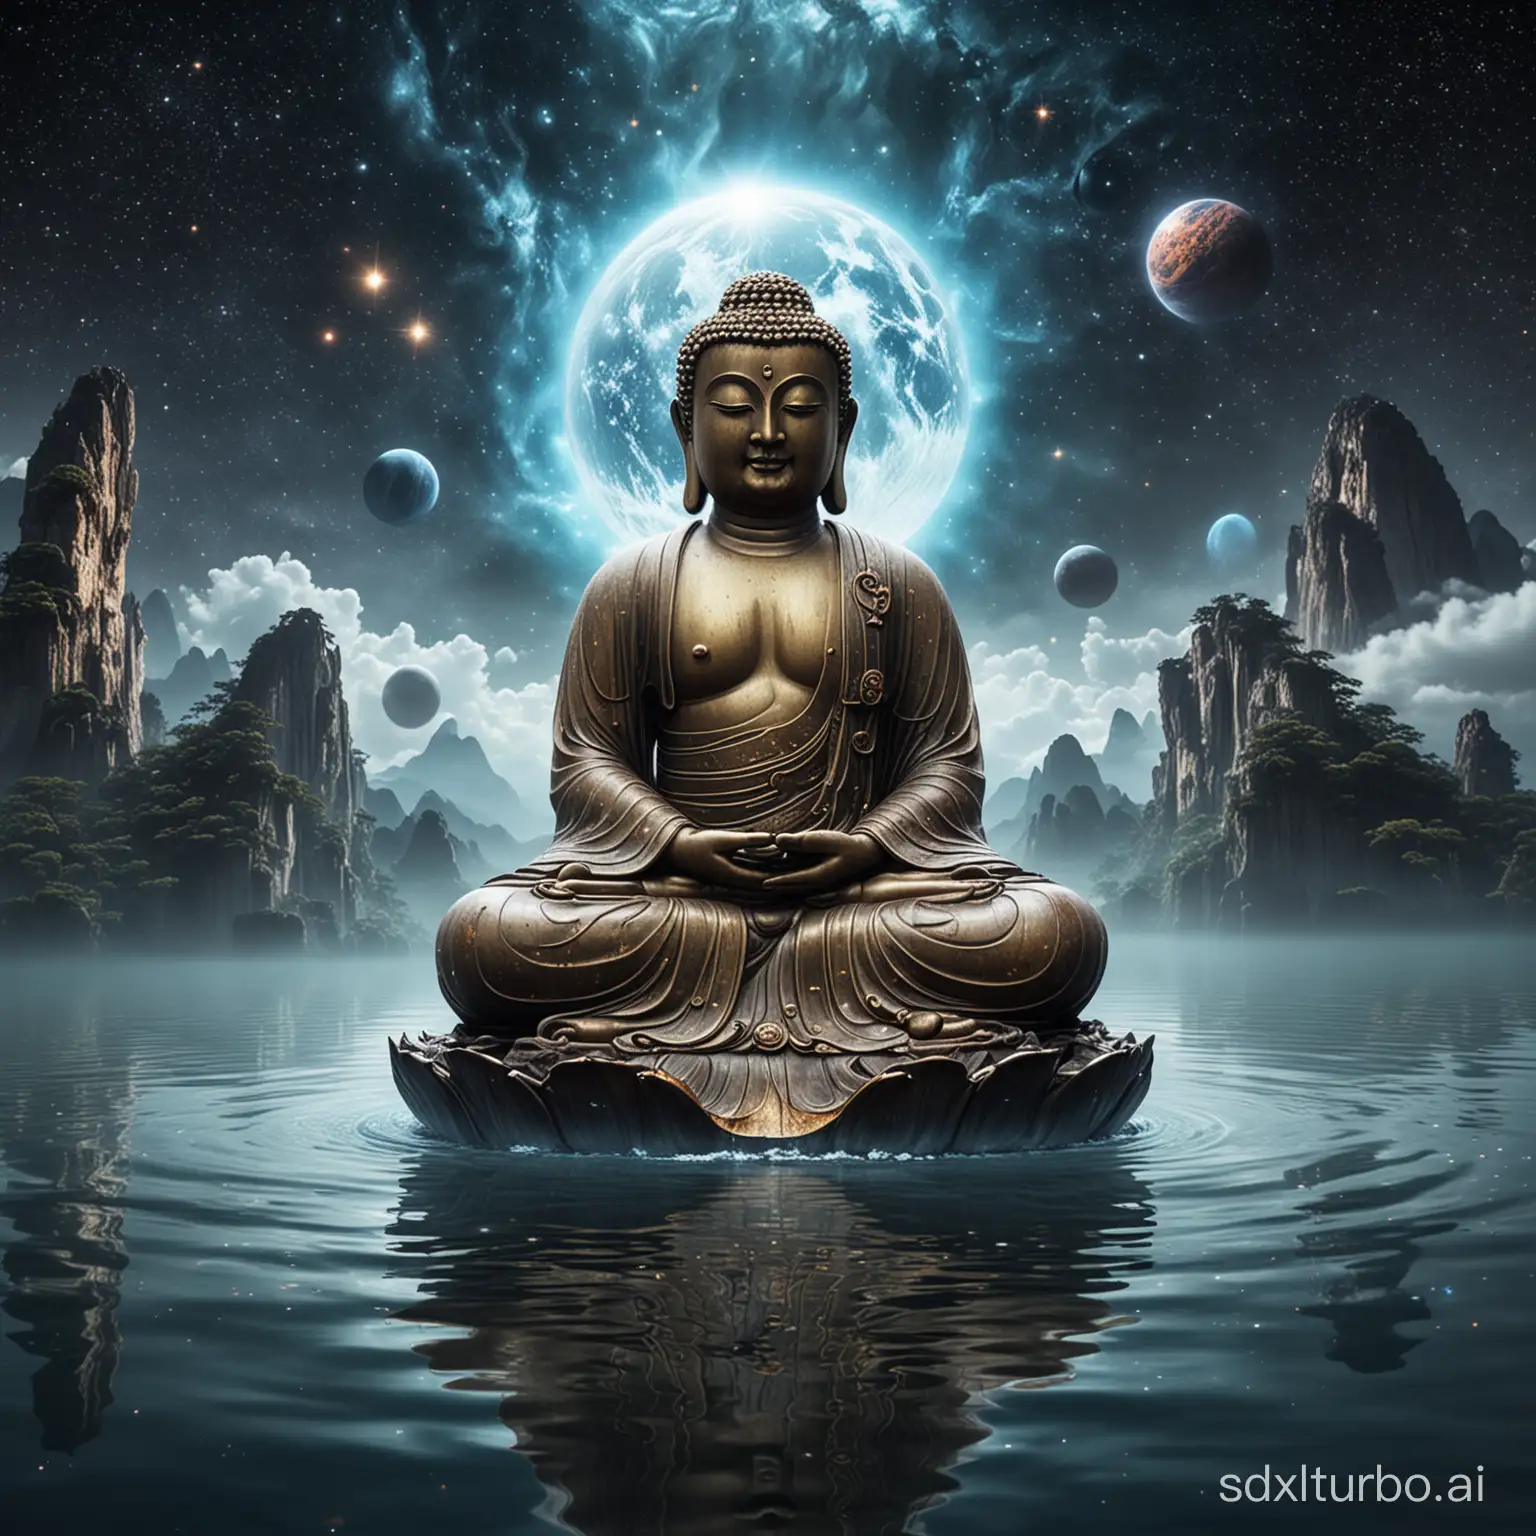 A Chinese Buddha sitting in the water, with a cosmic planet in the background.